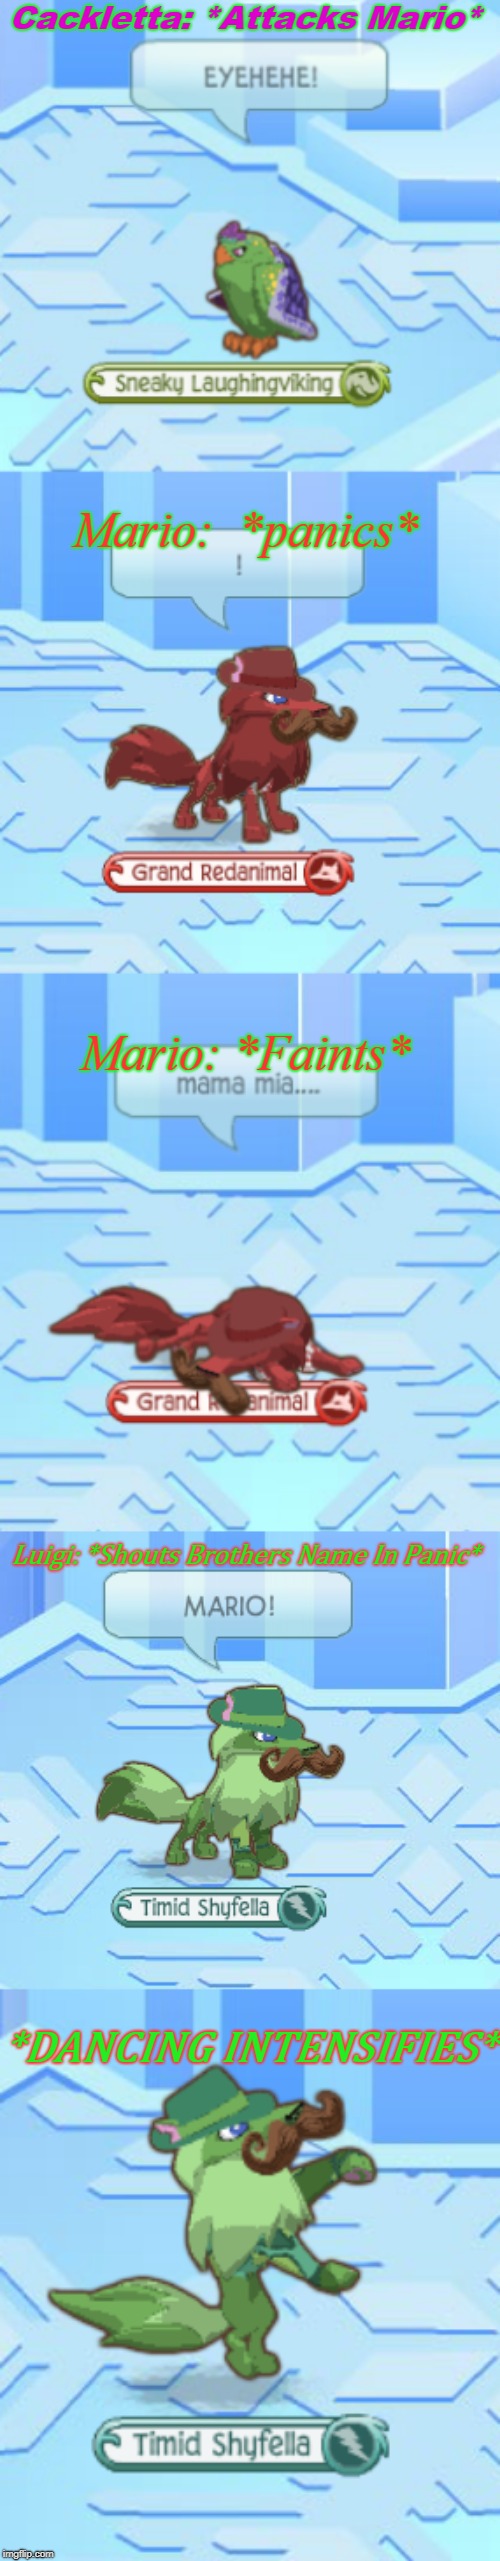 Mario Bros Superstar Saga Fainting in a Nutshell AJ edition | Cackletta: *Attacks Mario*; Mario:  *panics*; Mario: *Faints*; Luigi: *Shouts Brothers Name In Panic*; *DANCING INTENSIFIES* | image tagged in in a nutshell,animal jam,mario bros superstar saga | made w/ Imgflip meme maker